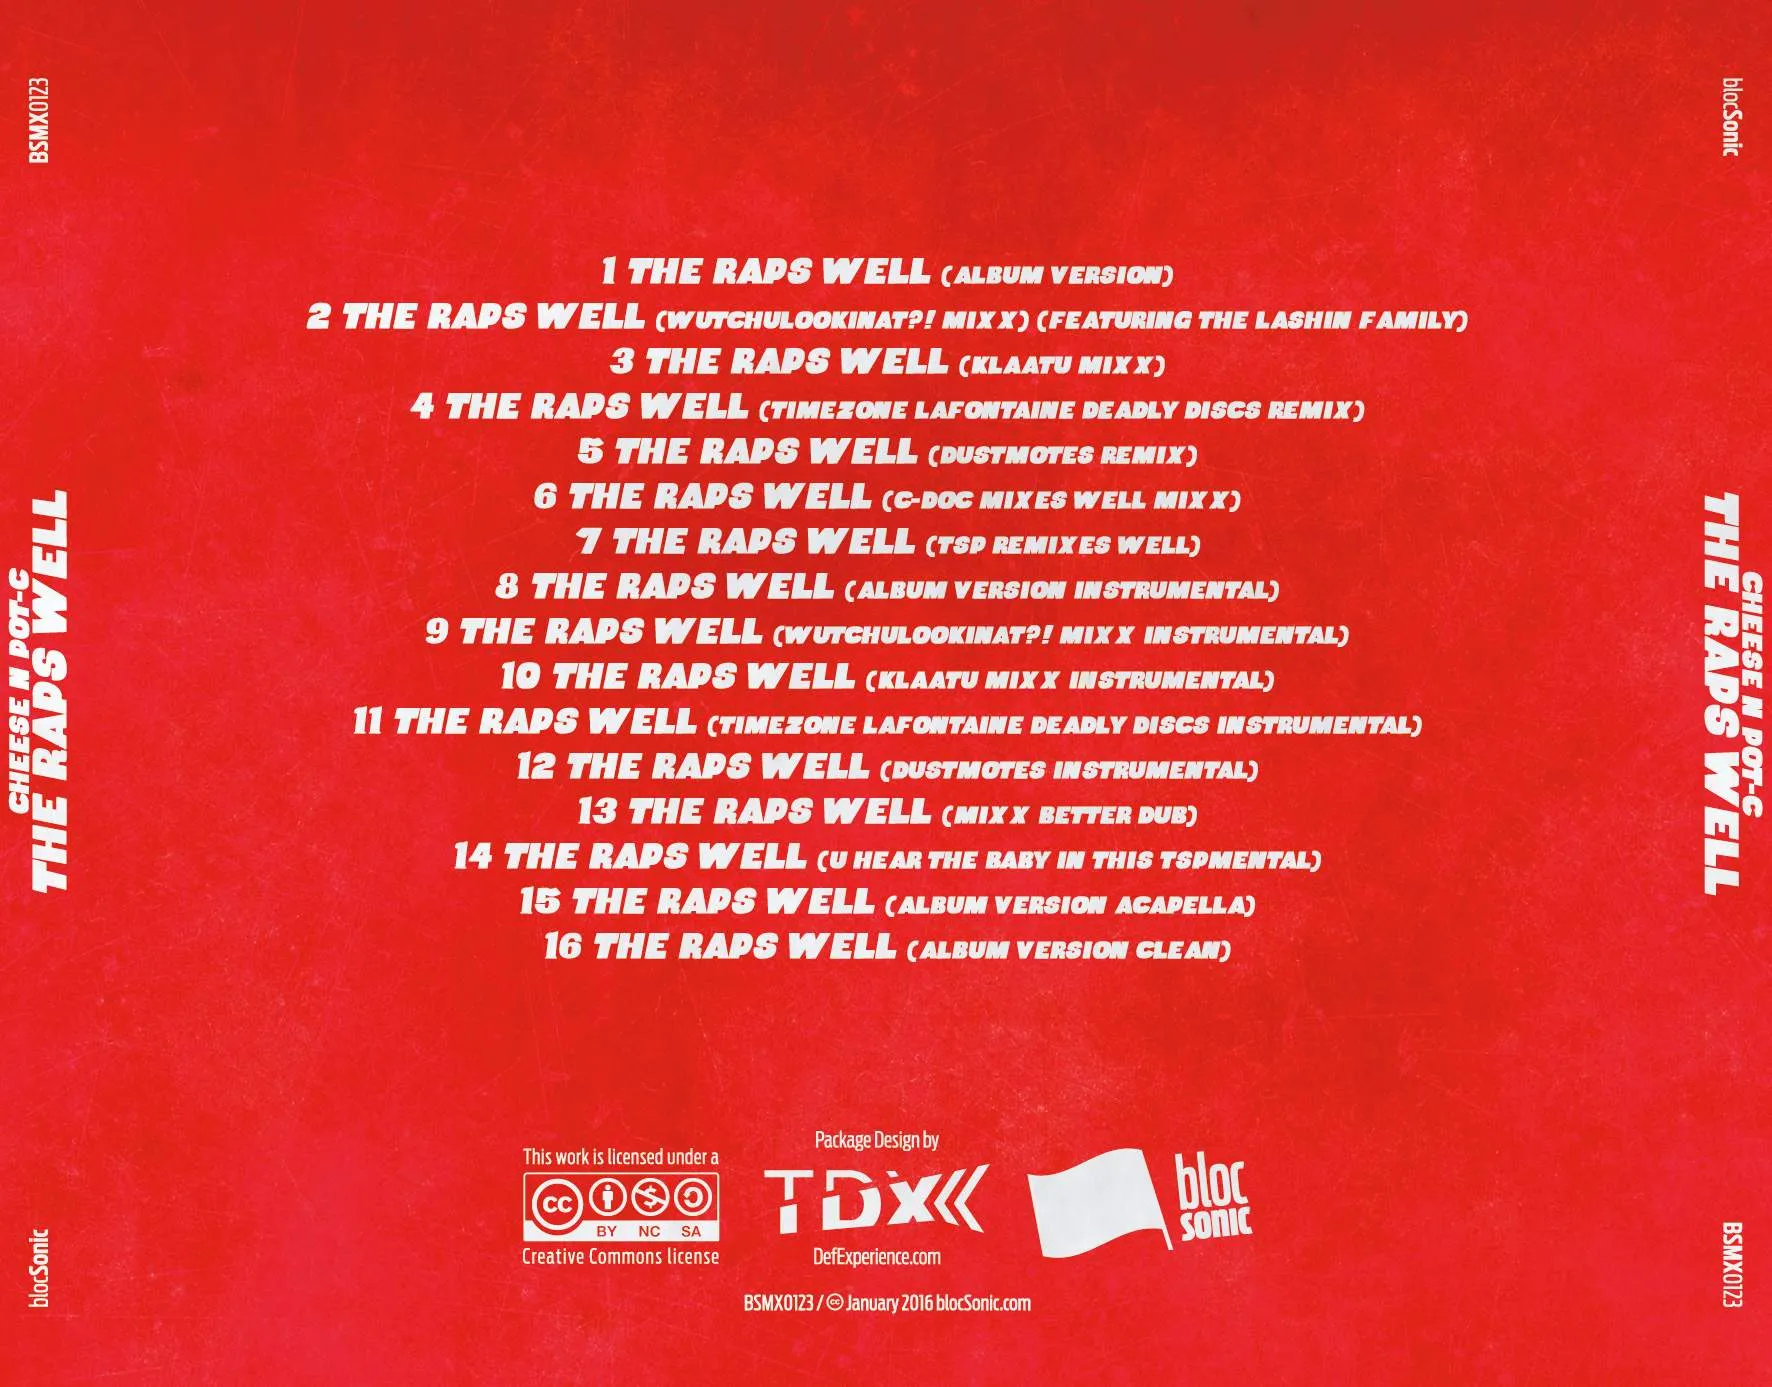 Album traycard for “The Raps Well” by Cheese N Pot-C